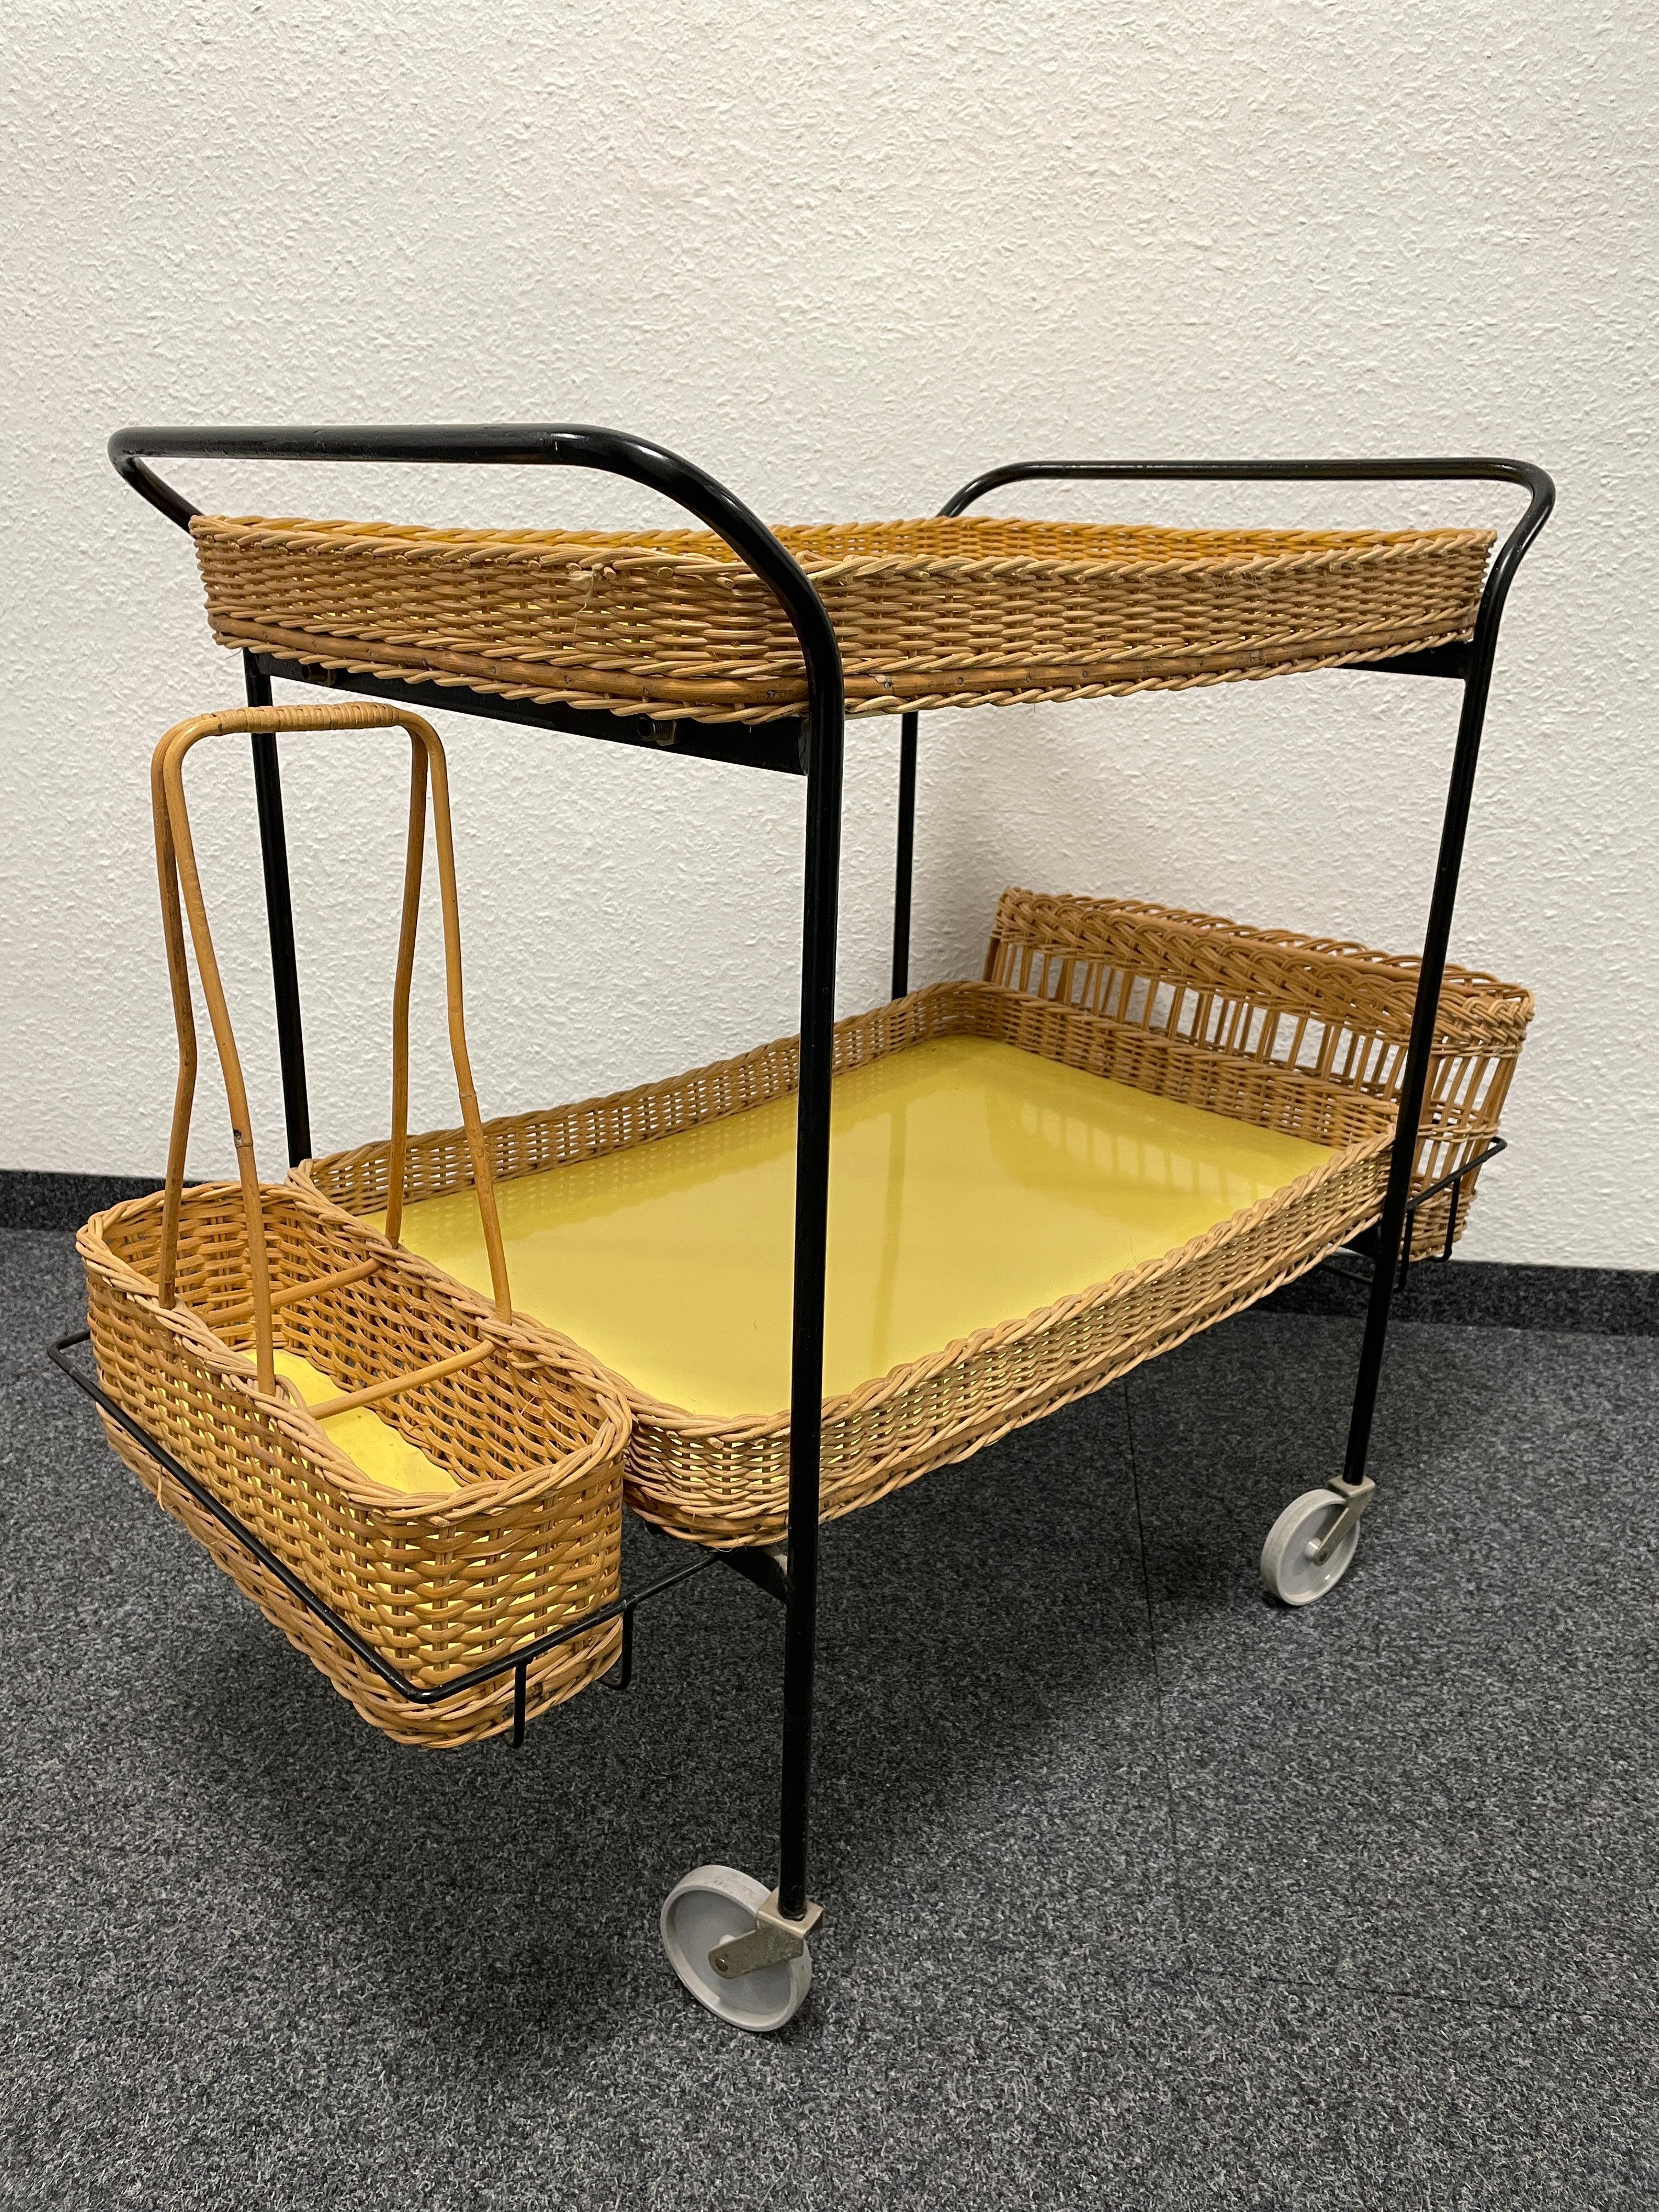 Wicker and Iron Bar Cart or Tea Trolley Table, German, 1950s In Good Condition For Sale In Nuernberg, DE